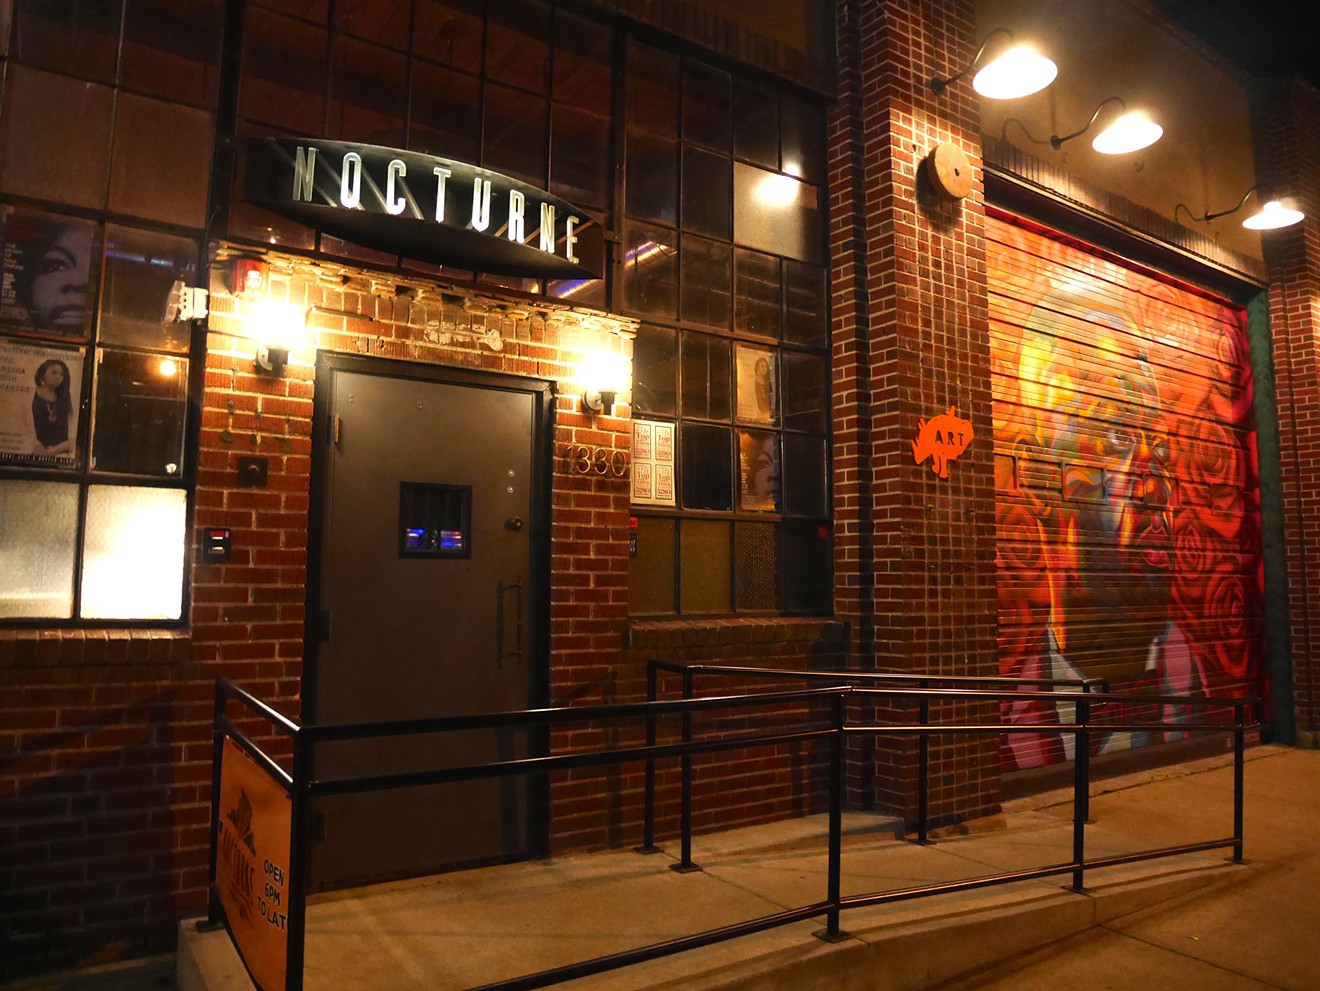 Nocturne's retro sign and RiNo street art prepare you for the ambience inside.